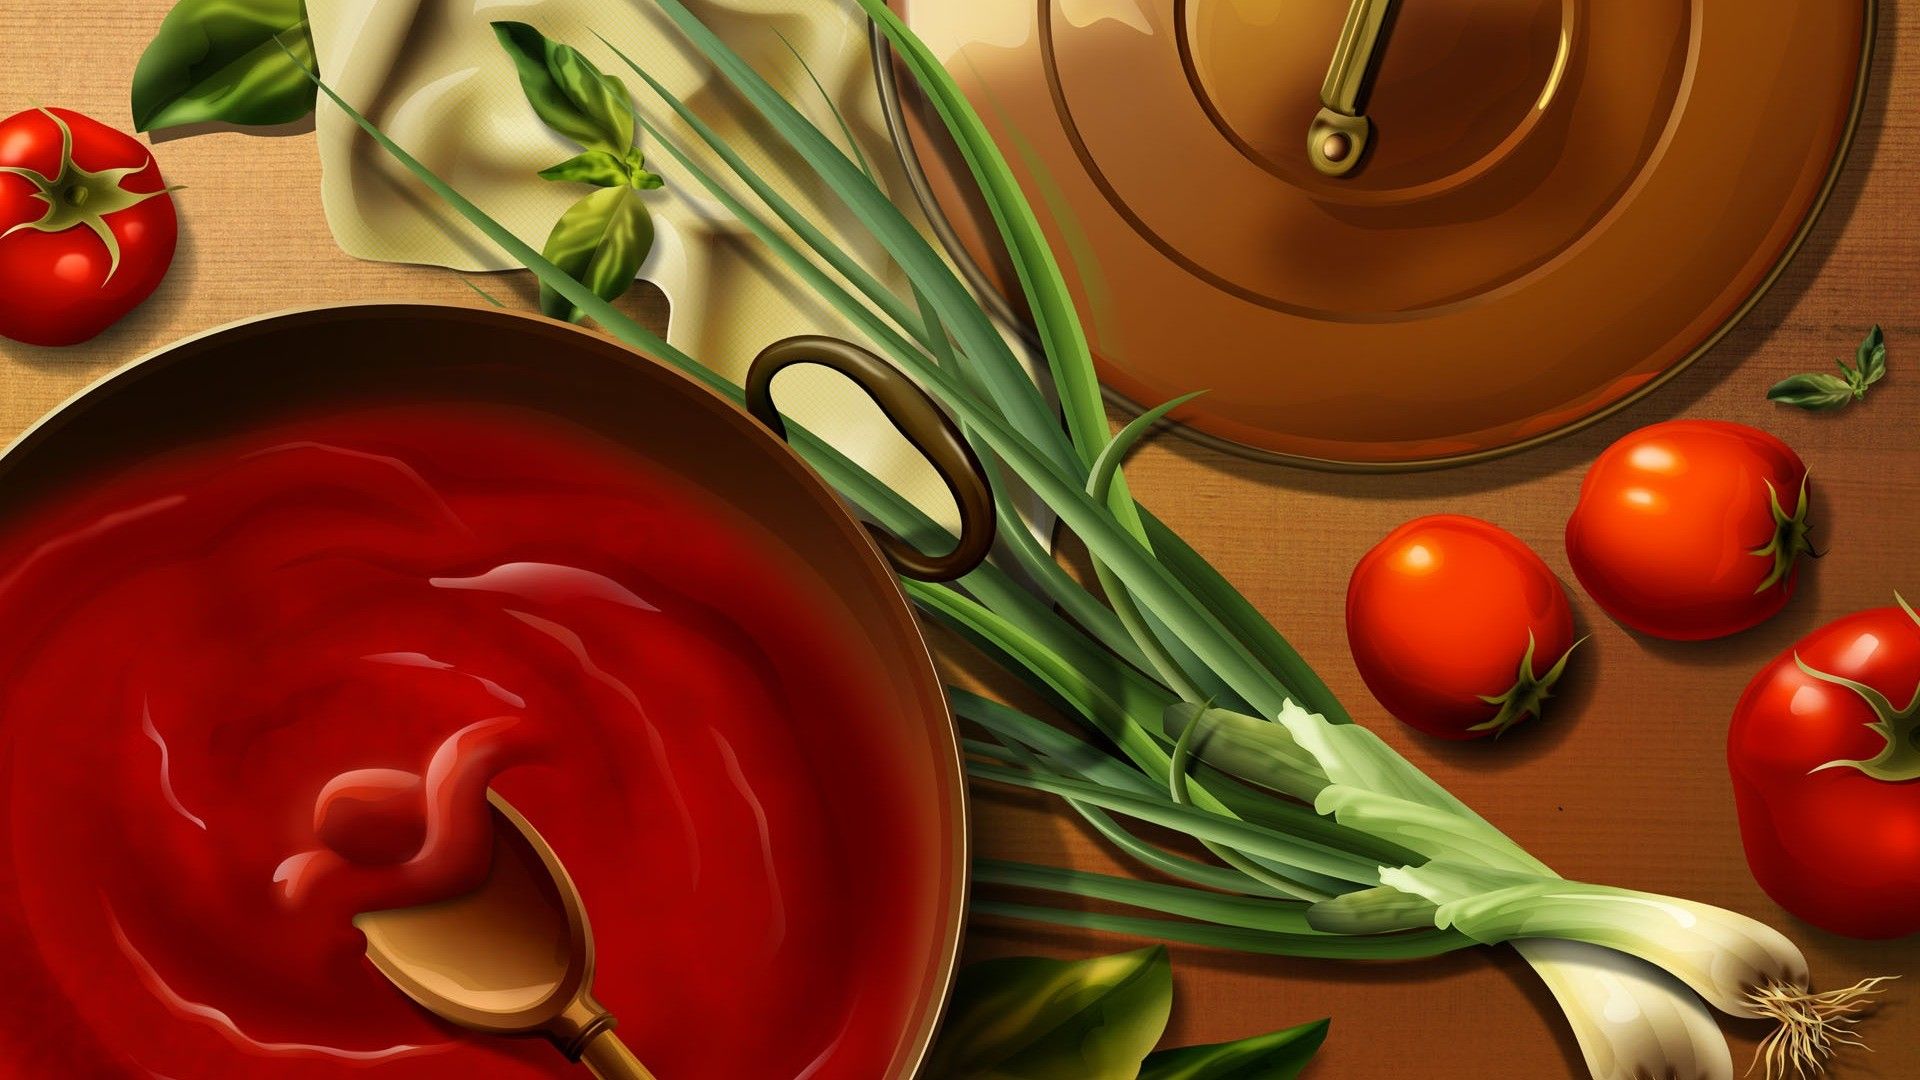 Cooking Wallpaper Wallpaper Background of Your Choice. Food, Food art, Cooking